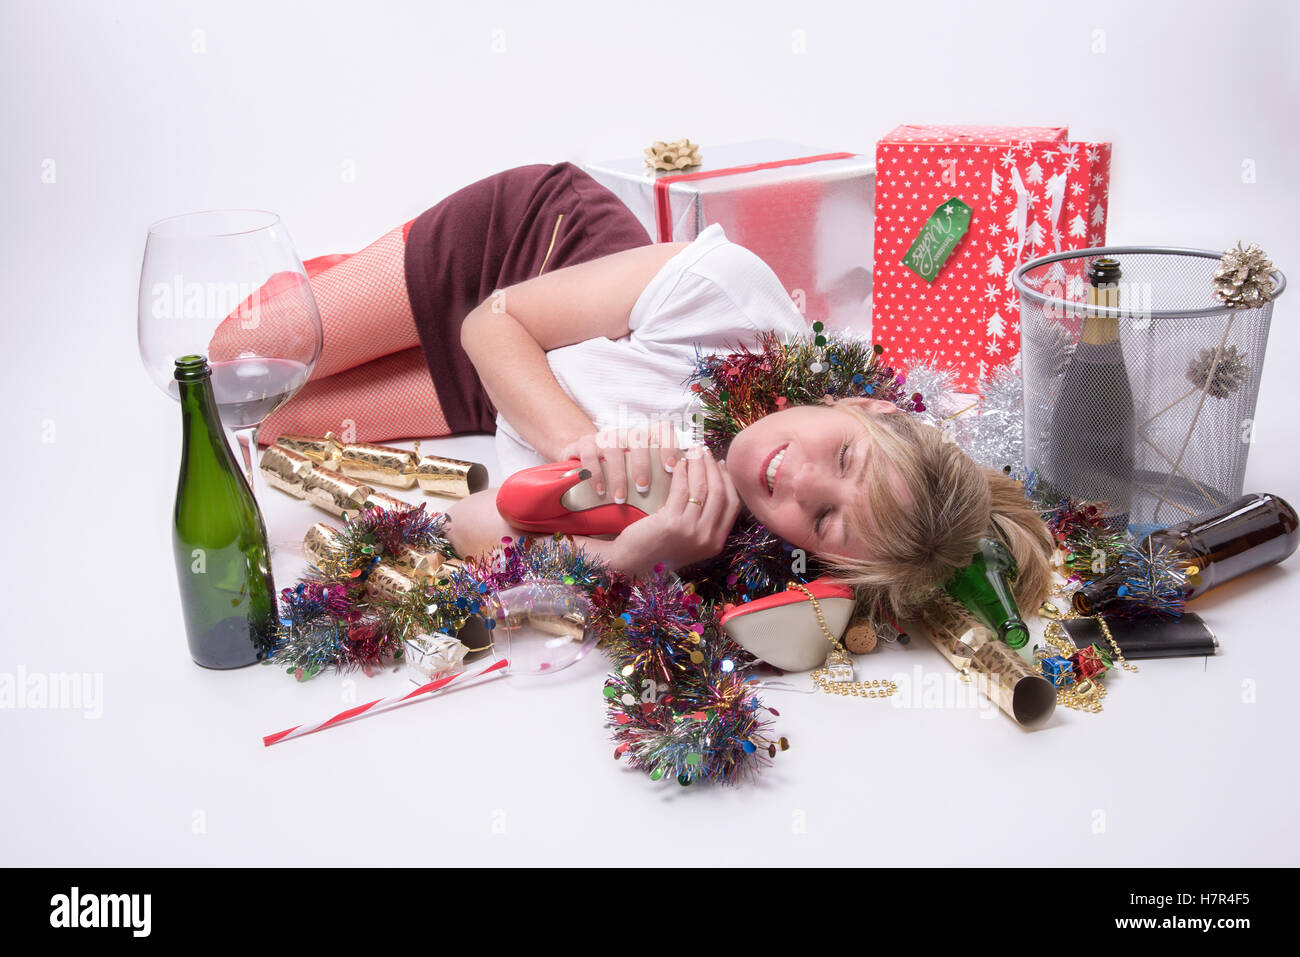 Woman at a party Female party goer sleeping on the floor Stock Photo